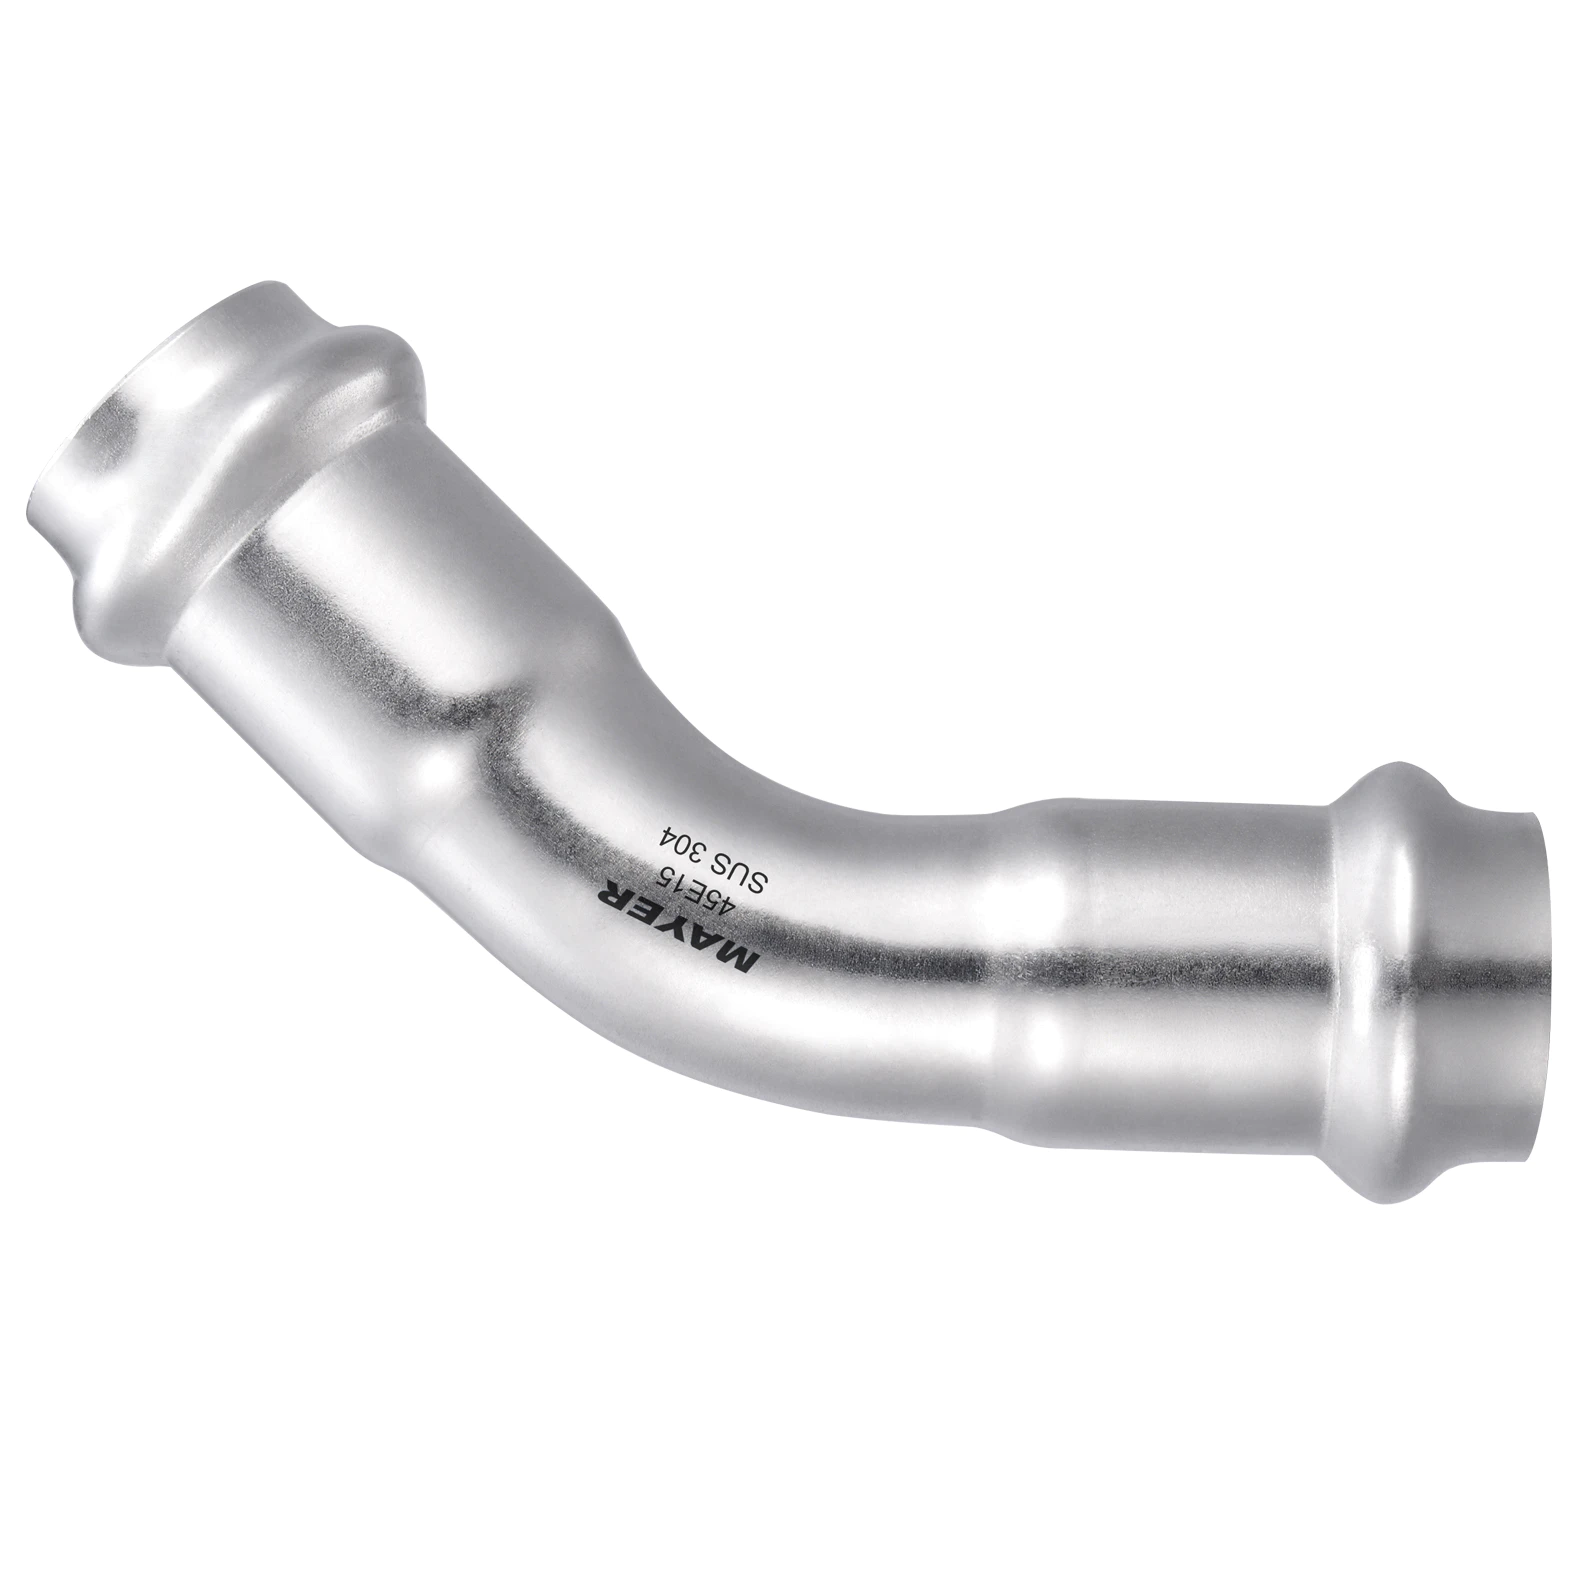 china factory direct sales 304/316l stainless steel fitting 45 degree elbow/bend V profile